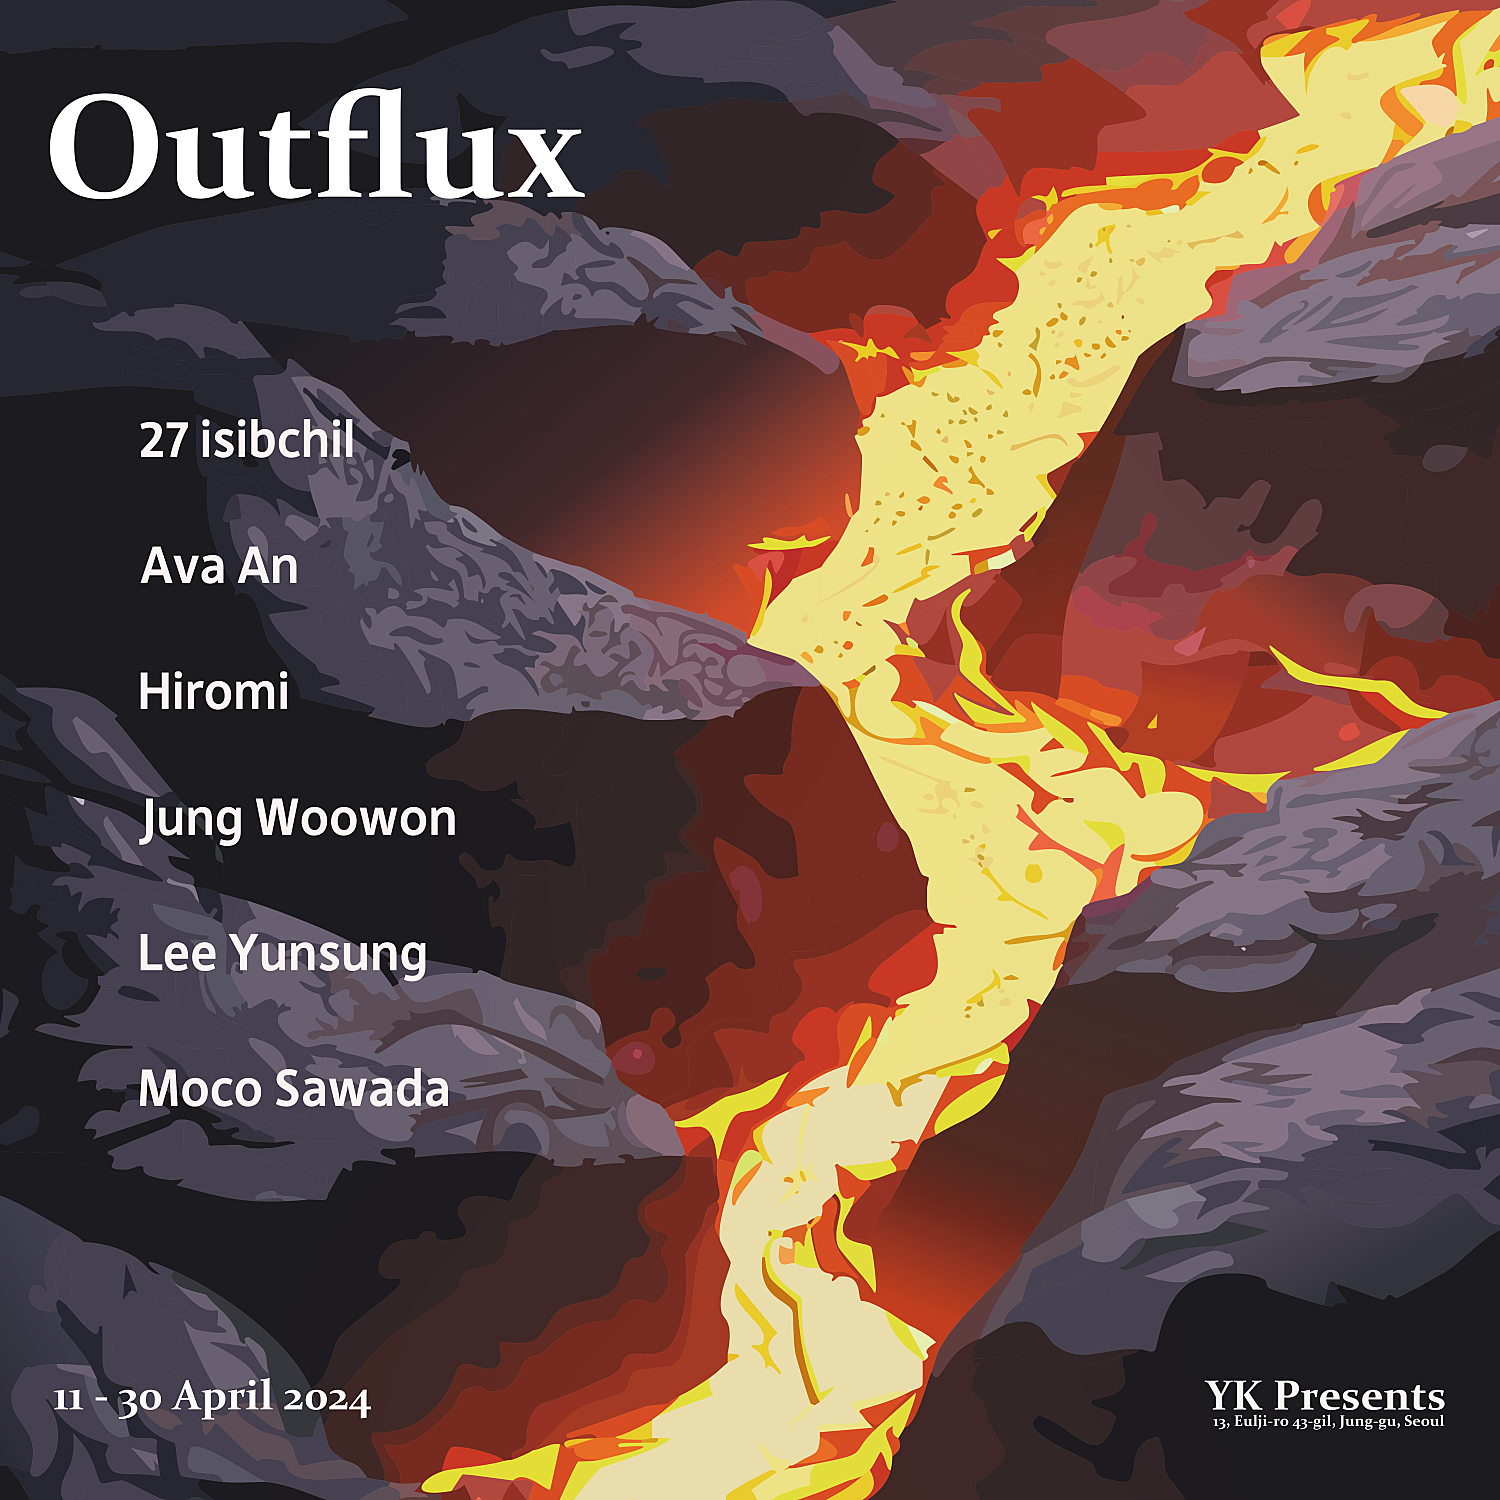 Outflux 이미지